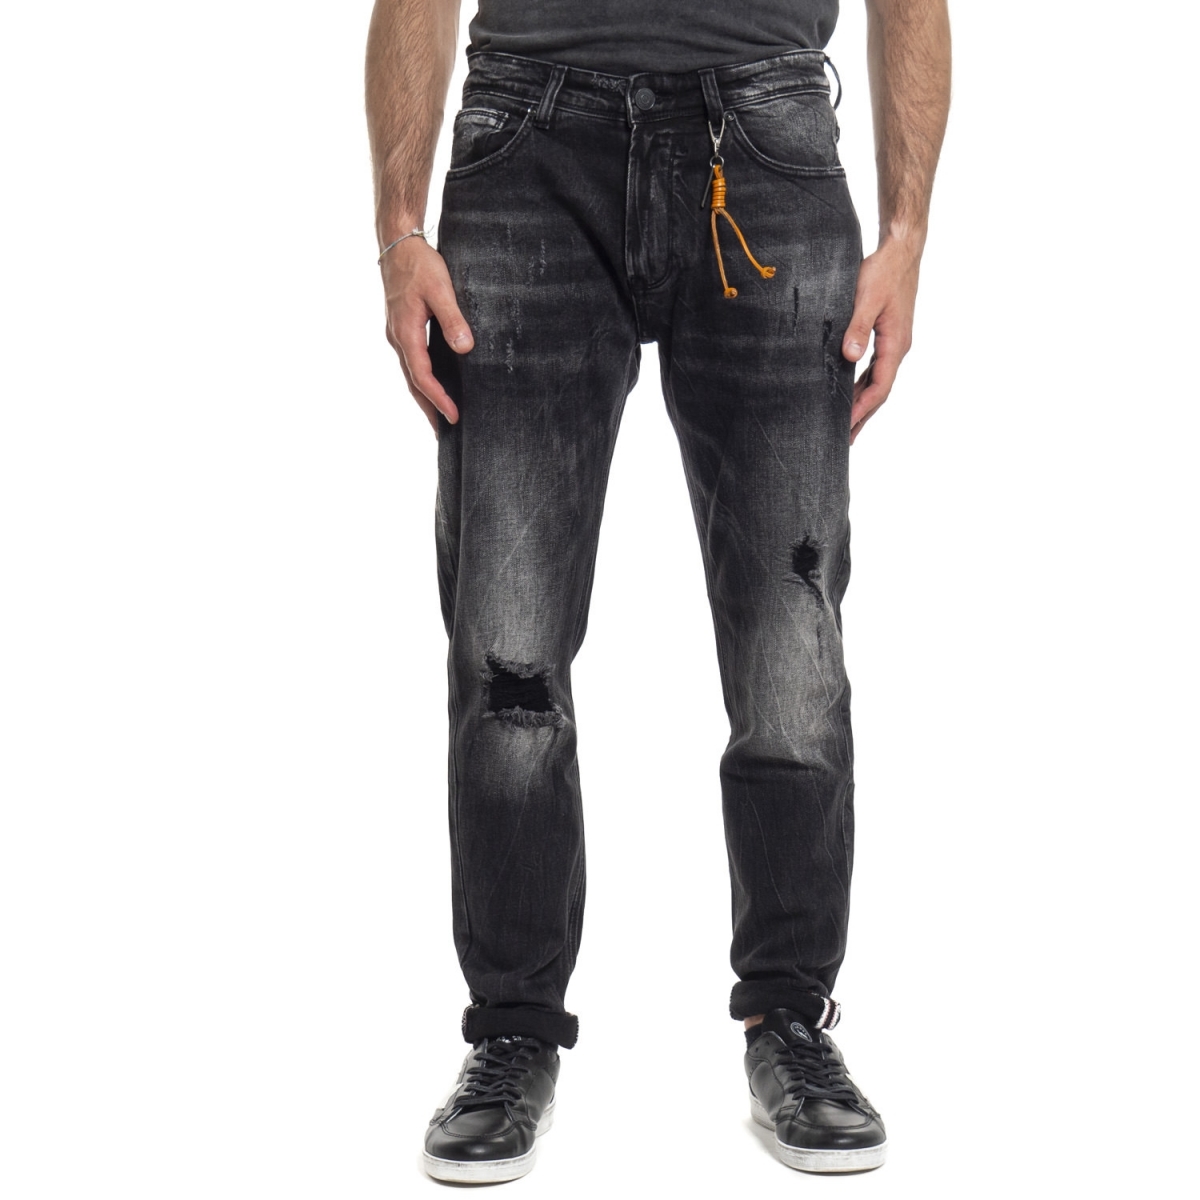 Kleidung Jeans mann Jeans GL2005T GIANNI LUPO Cafedelmar Shop